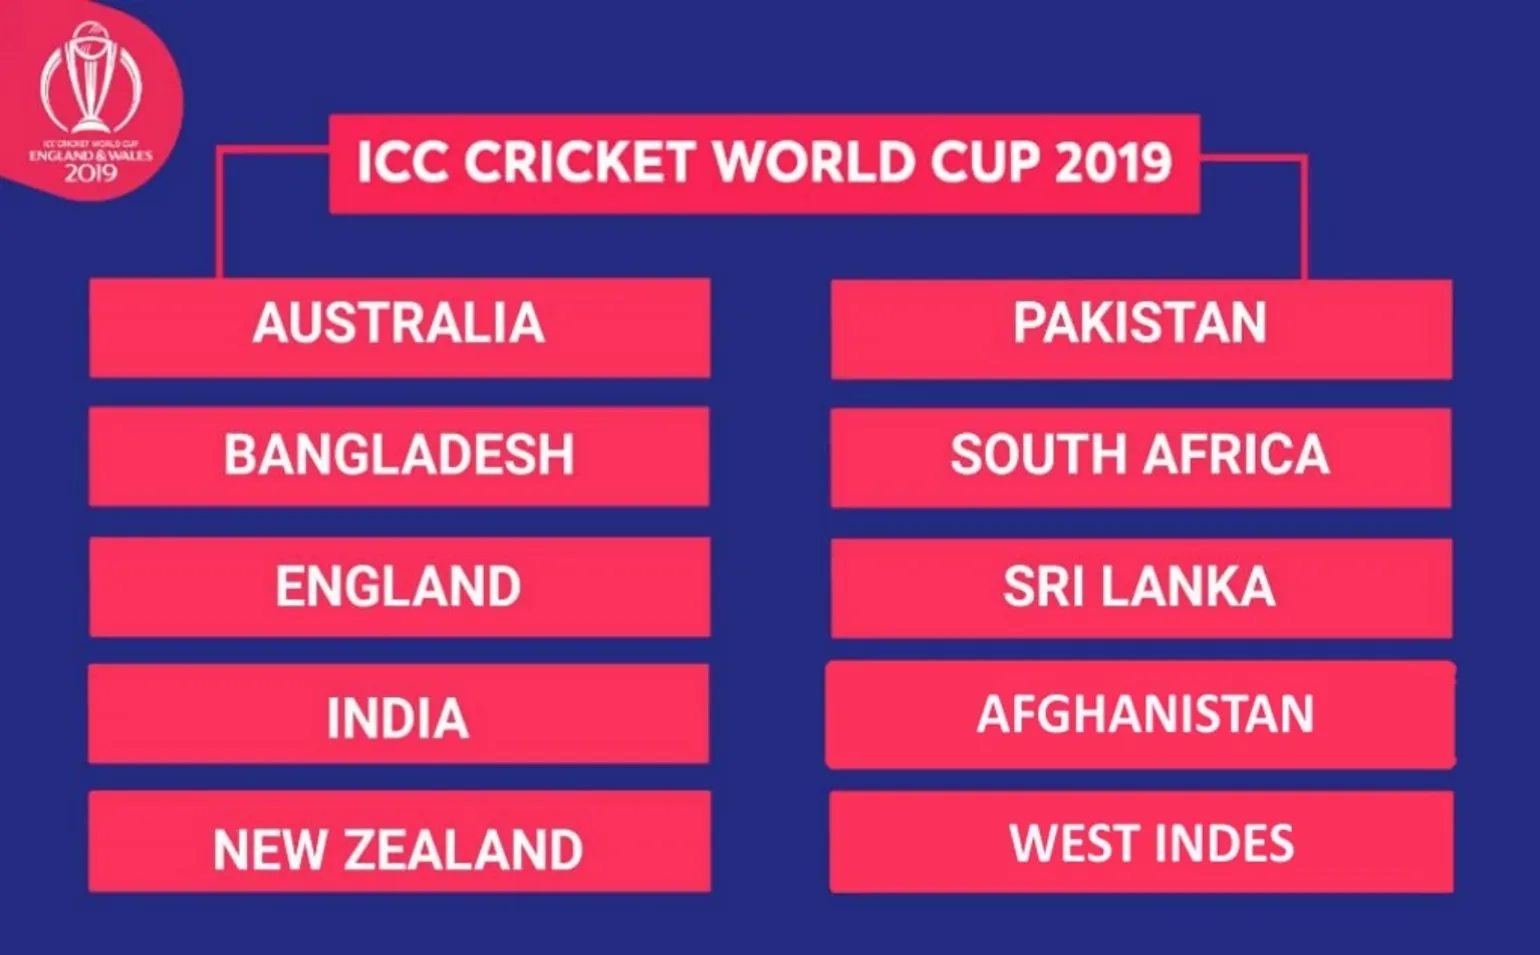 How about list of cricket world cup winners since 1975?